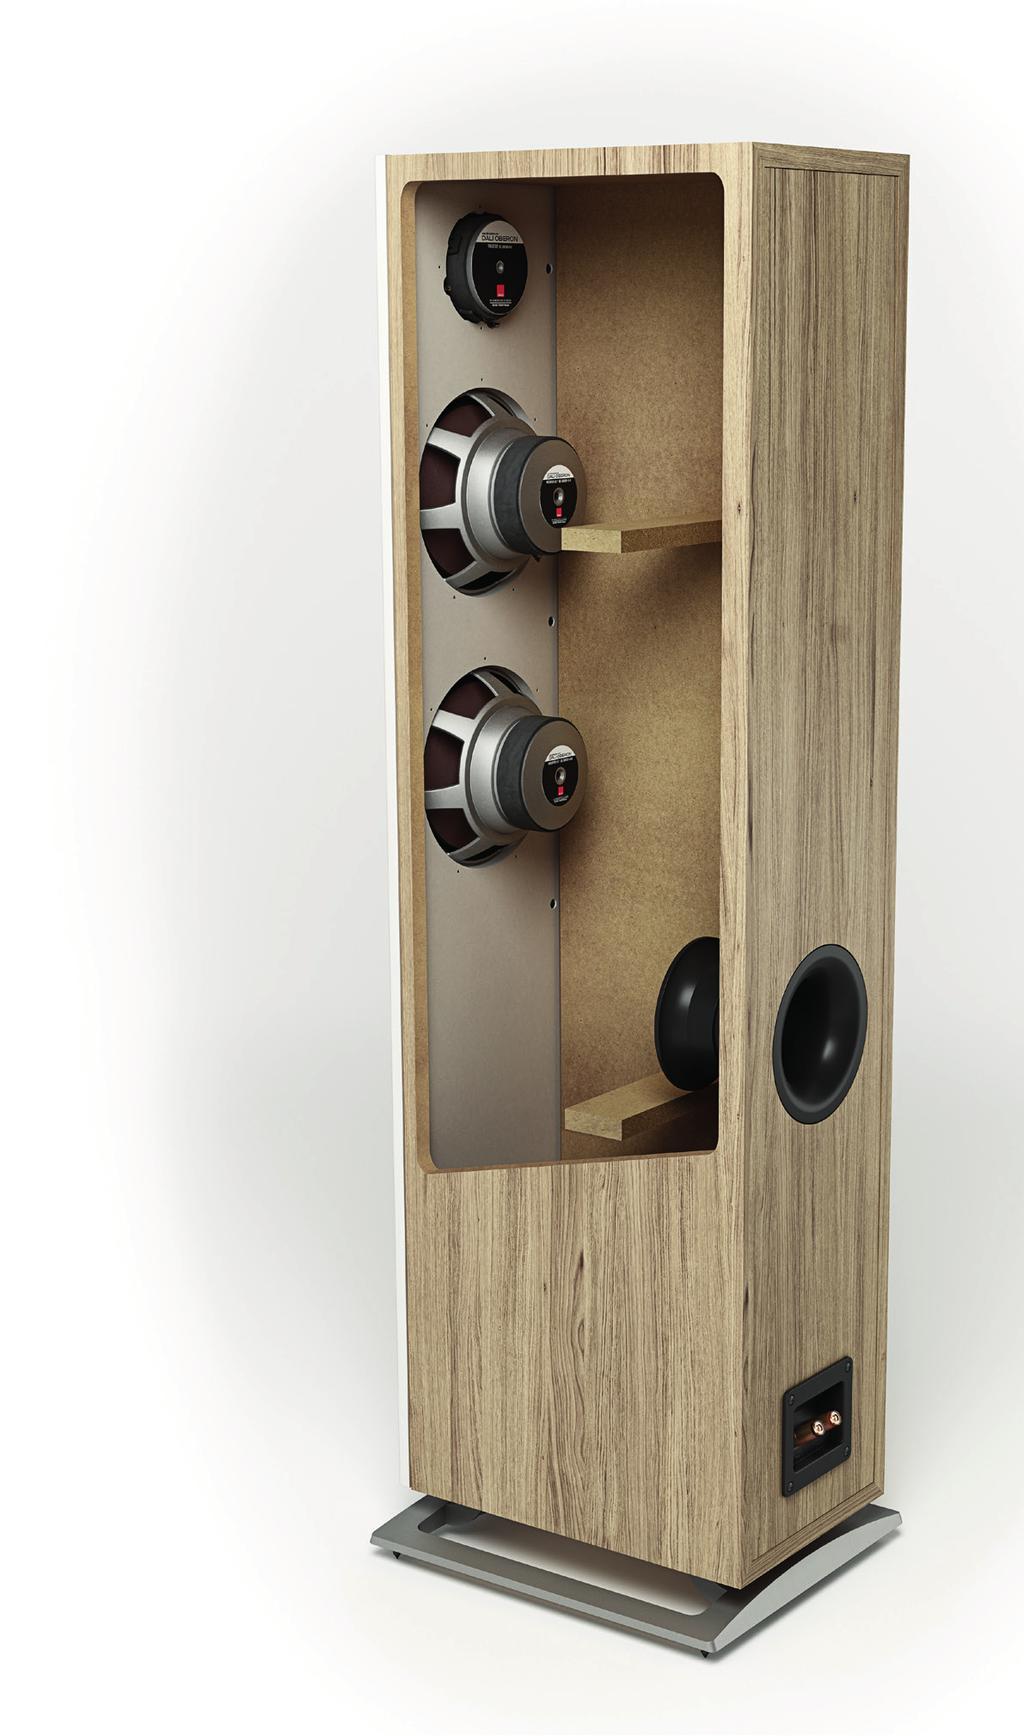 CABINET Constructed from CNC machined MDF board and dressed in carefully selected high-grade vinyls, the cabinet forms the solid base for the speaker.